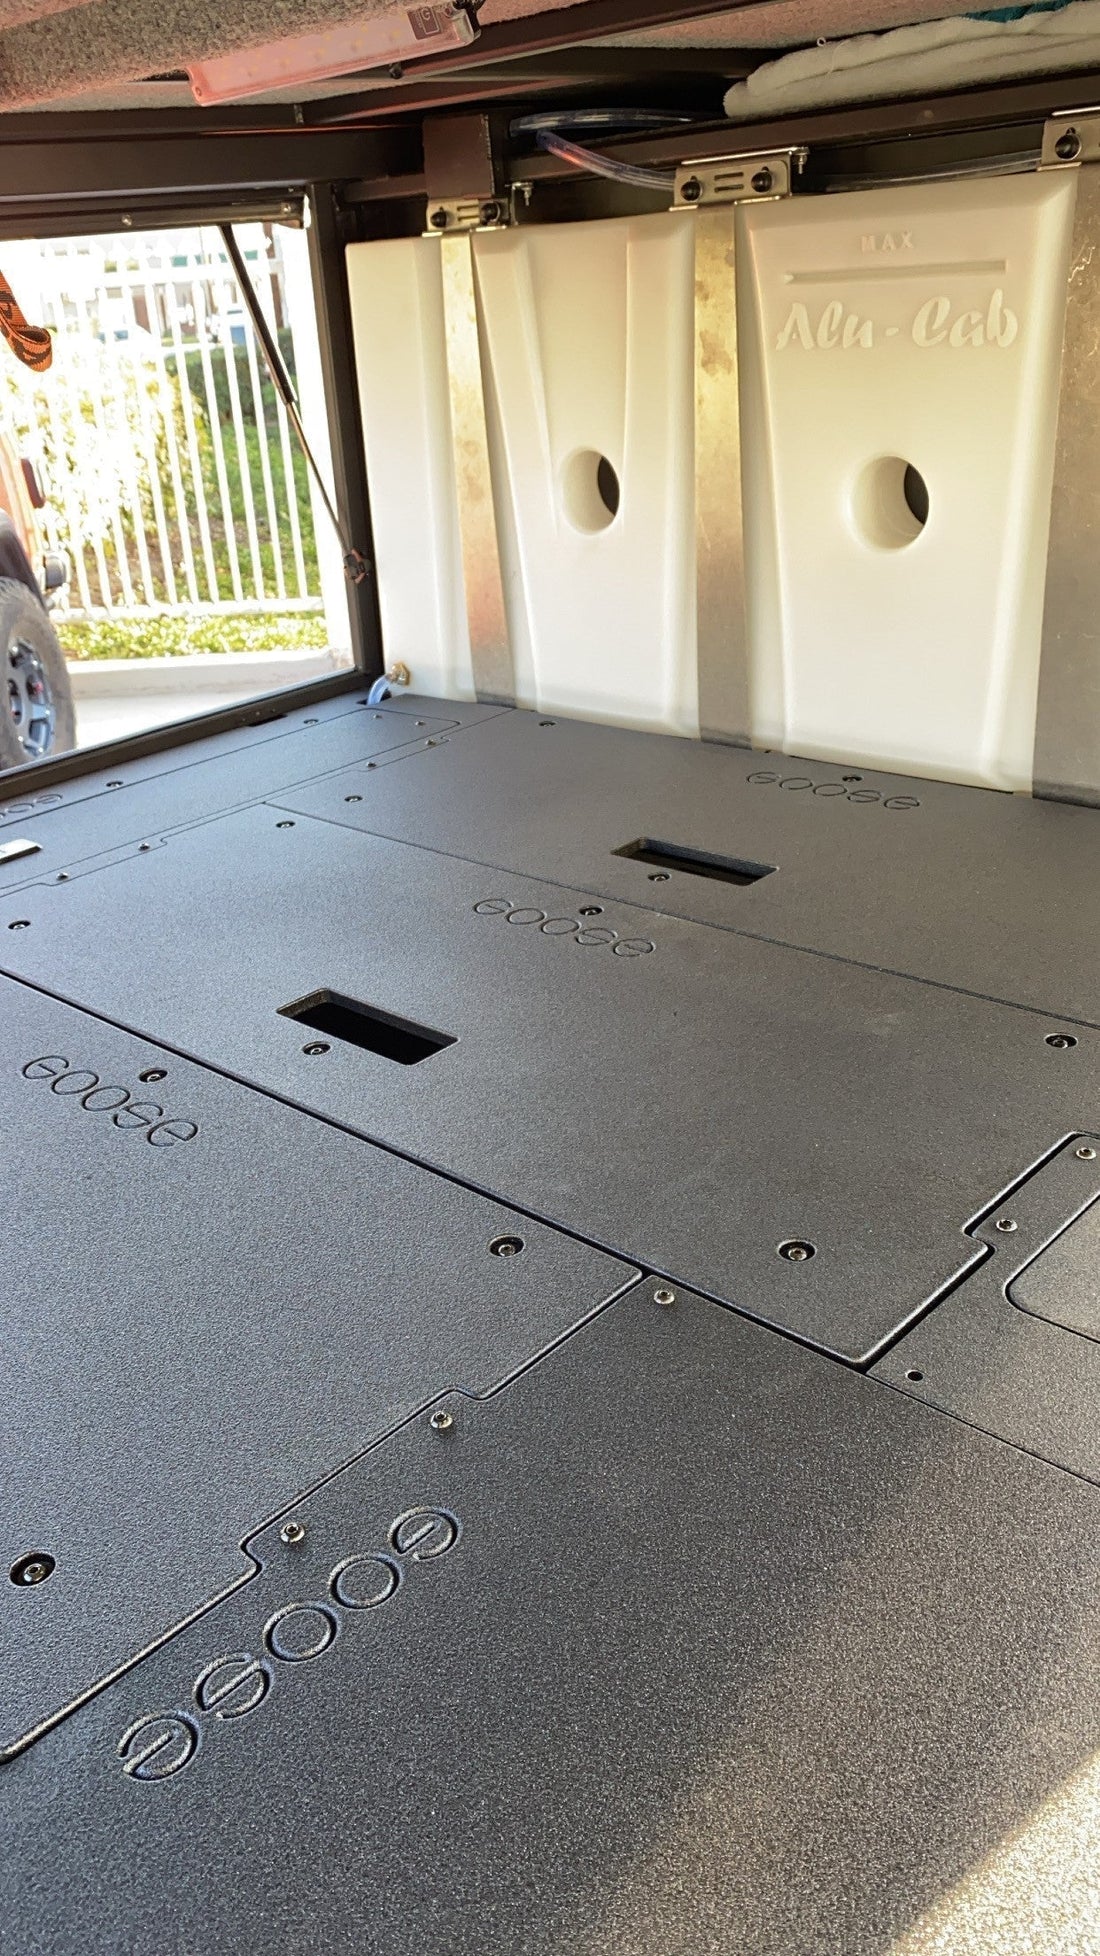 Alu-Cab Canopy Camper - Toyota Tacoma 2005-Present 2nd & 3rd Gen. - Sleep Deck Panel - Double Drawer/Power Management Module to Double Drawer/Power Management Module